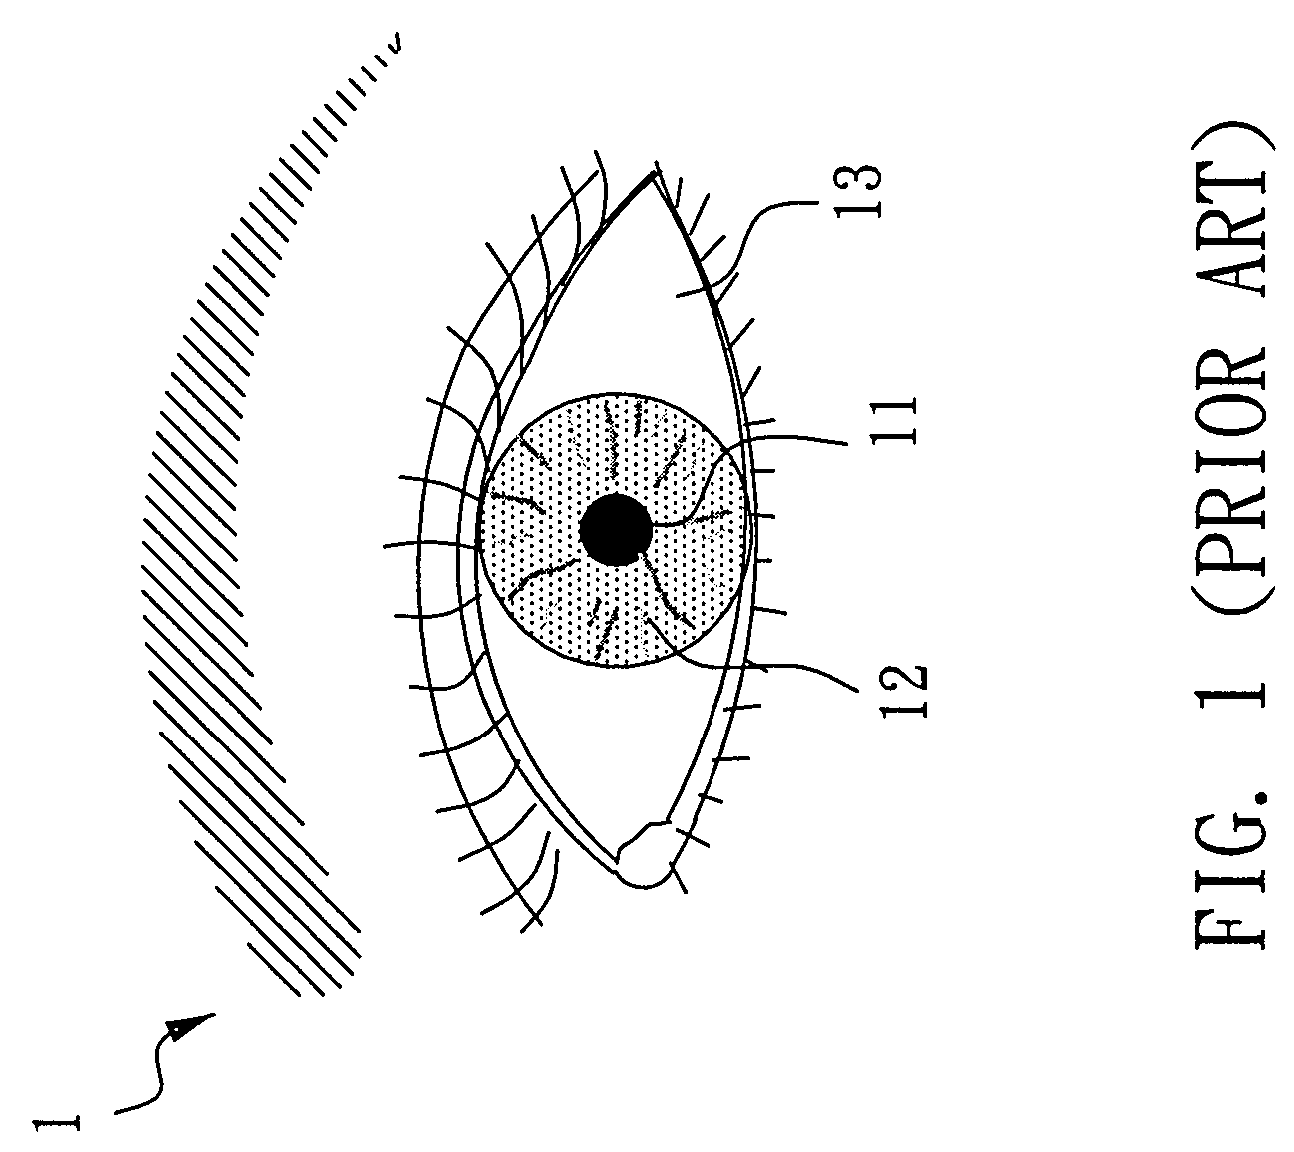 Iris extraction method capable of precisely determining positions and sizes of irises in a digital face image